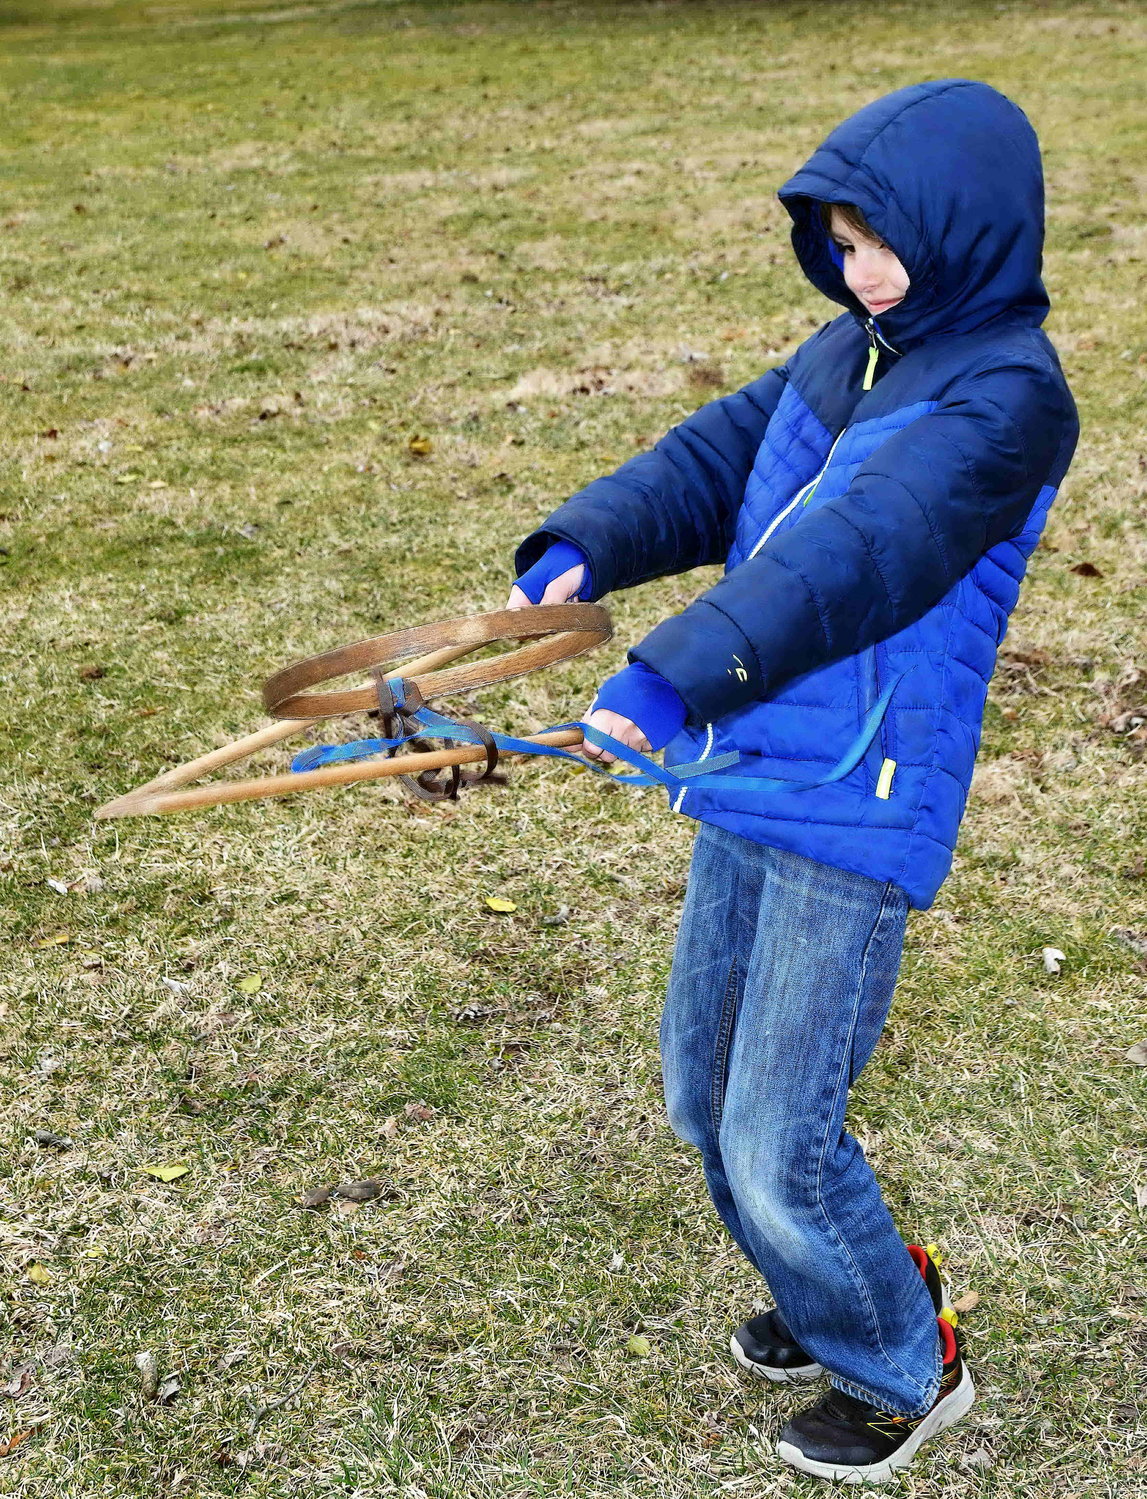 Jeffrey Conover, 11, plays with a Colonial toy.